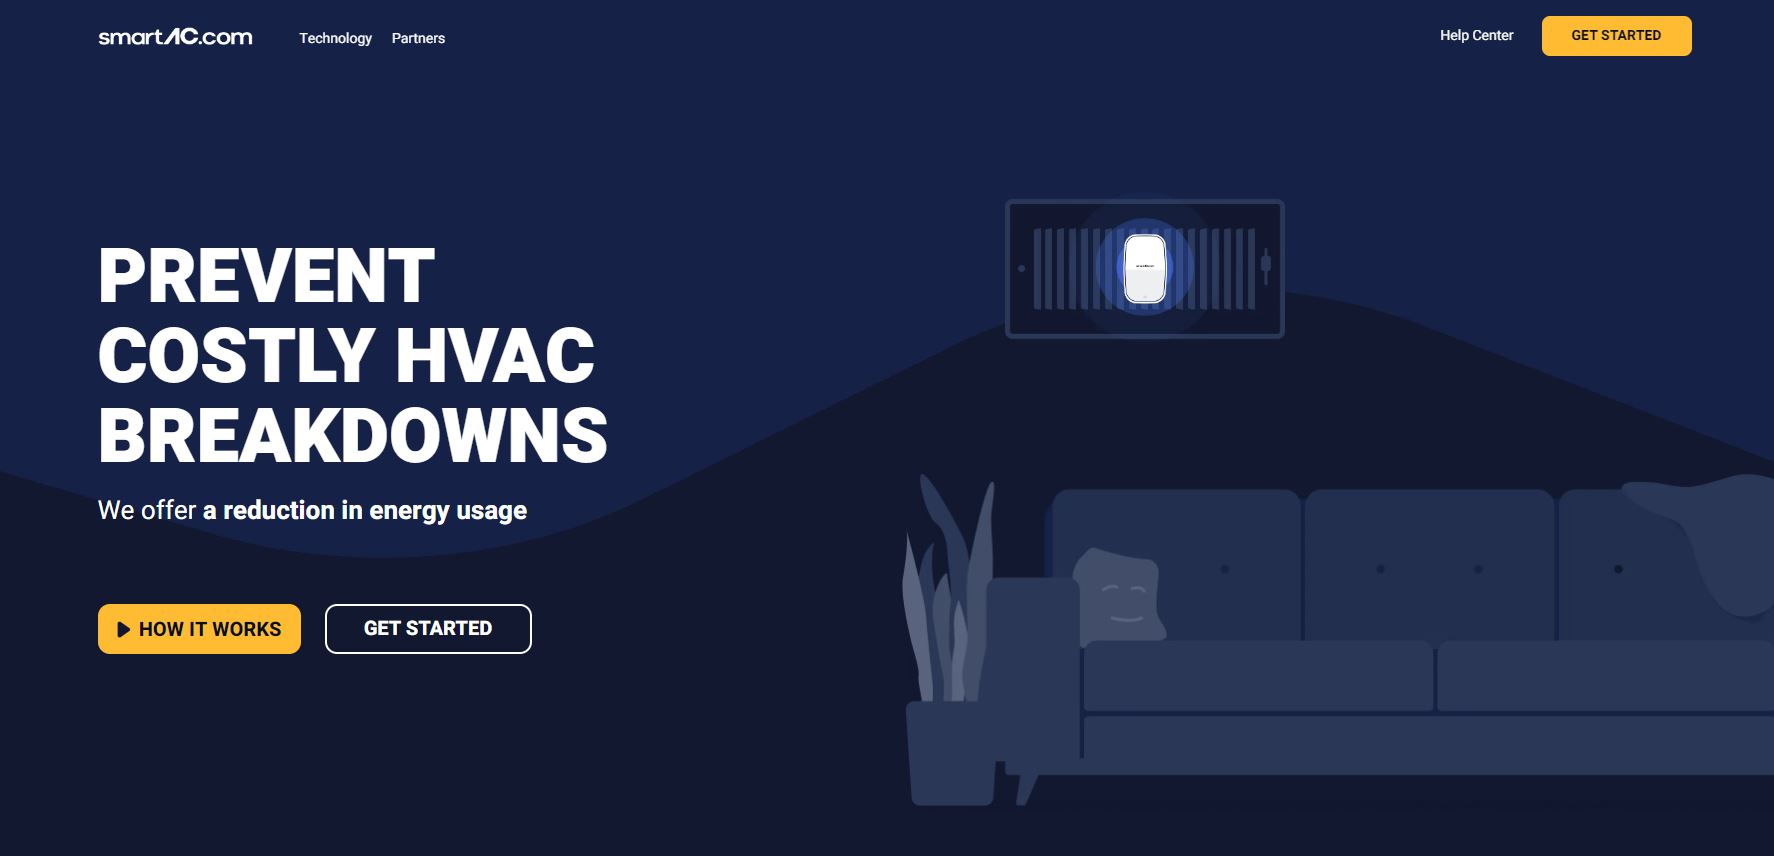 SmartAC.com, the startup has recently raised $22M in funding. They offer a preventative solution to costly HVAC breakdowns with their innovative technology